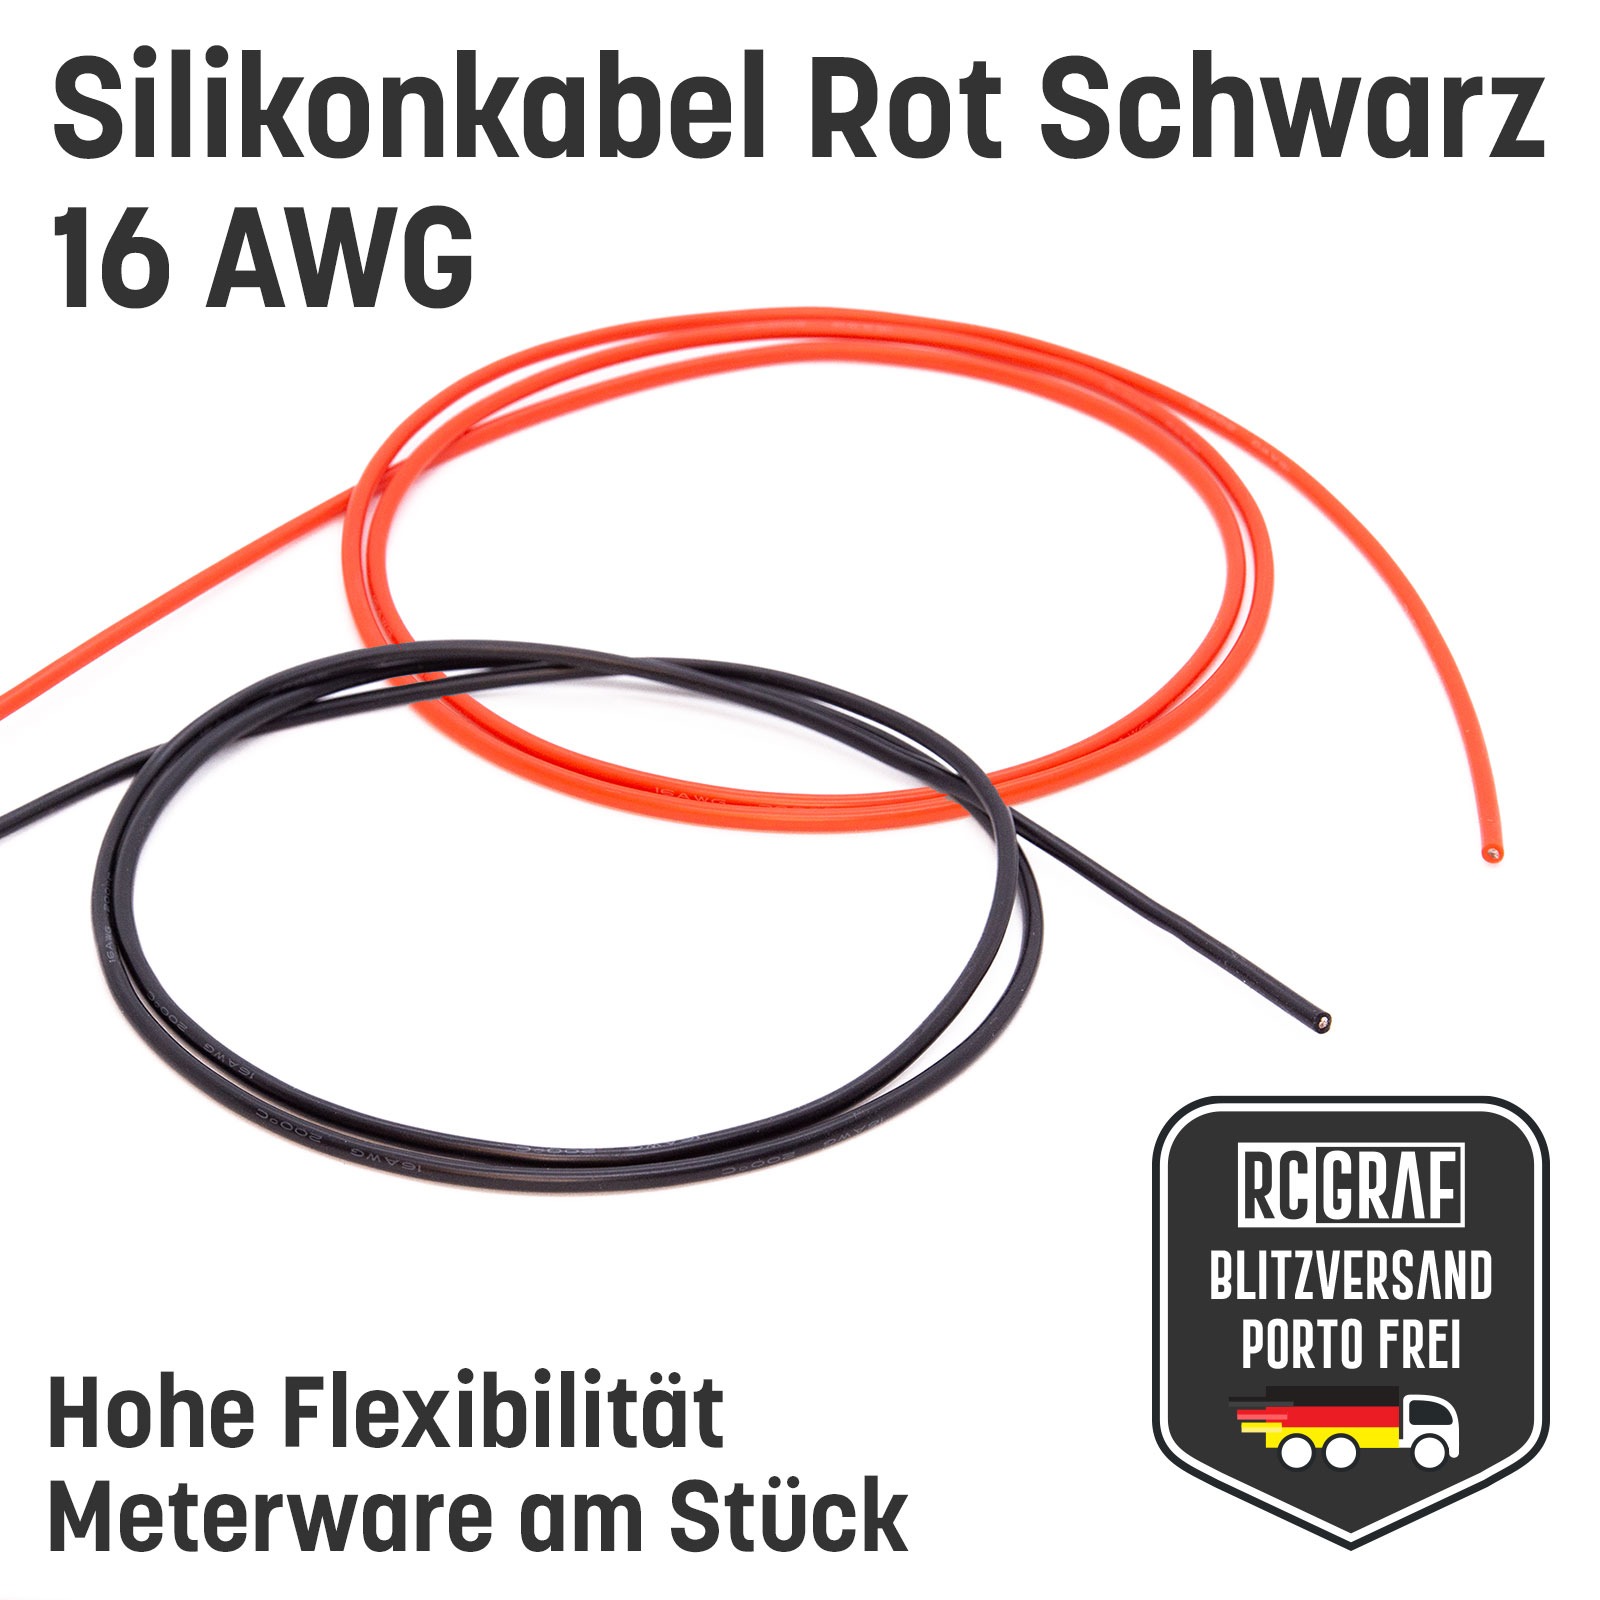 Silicone Cable 16 AWG High Flex Red Black Copper RC Cable